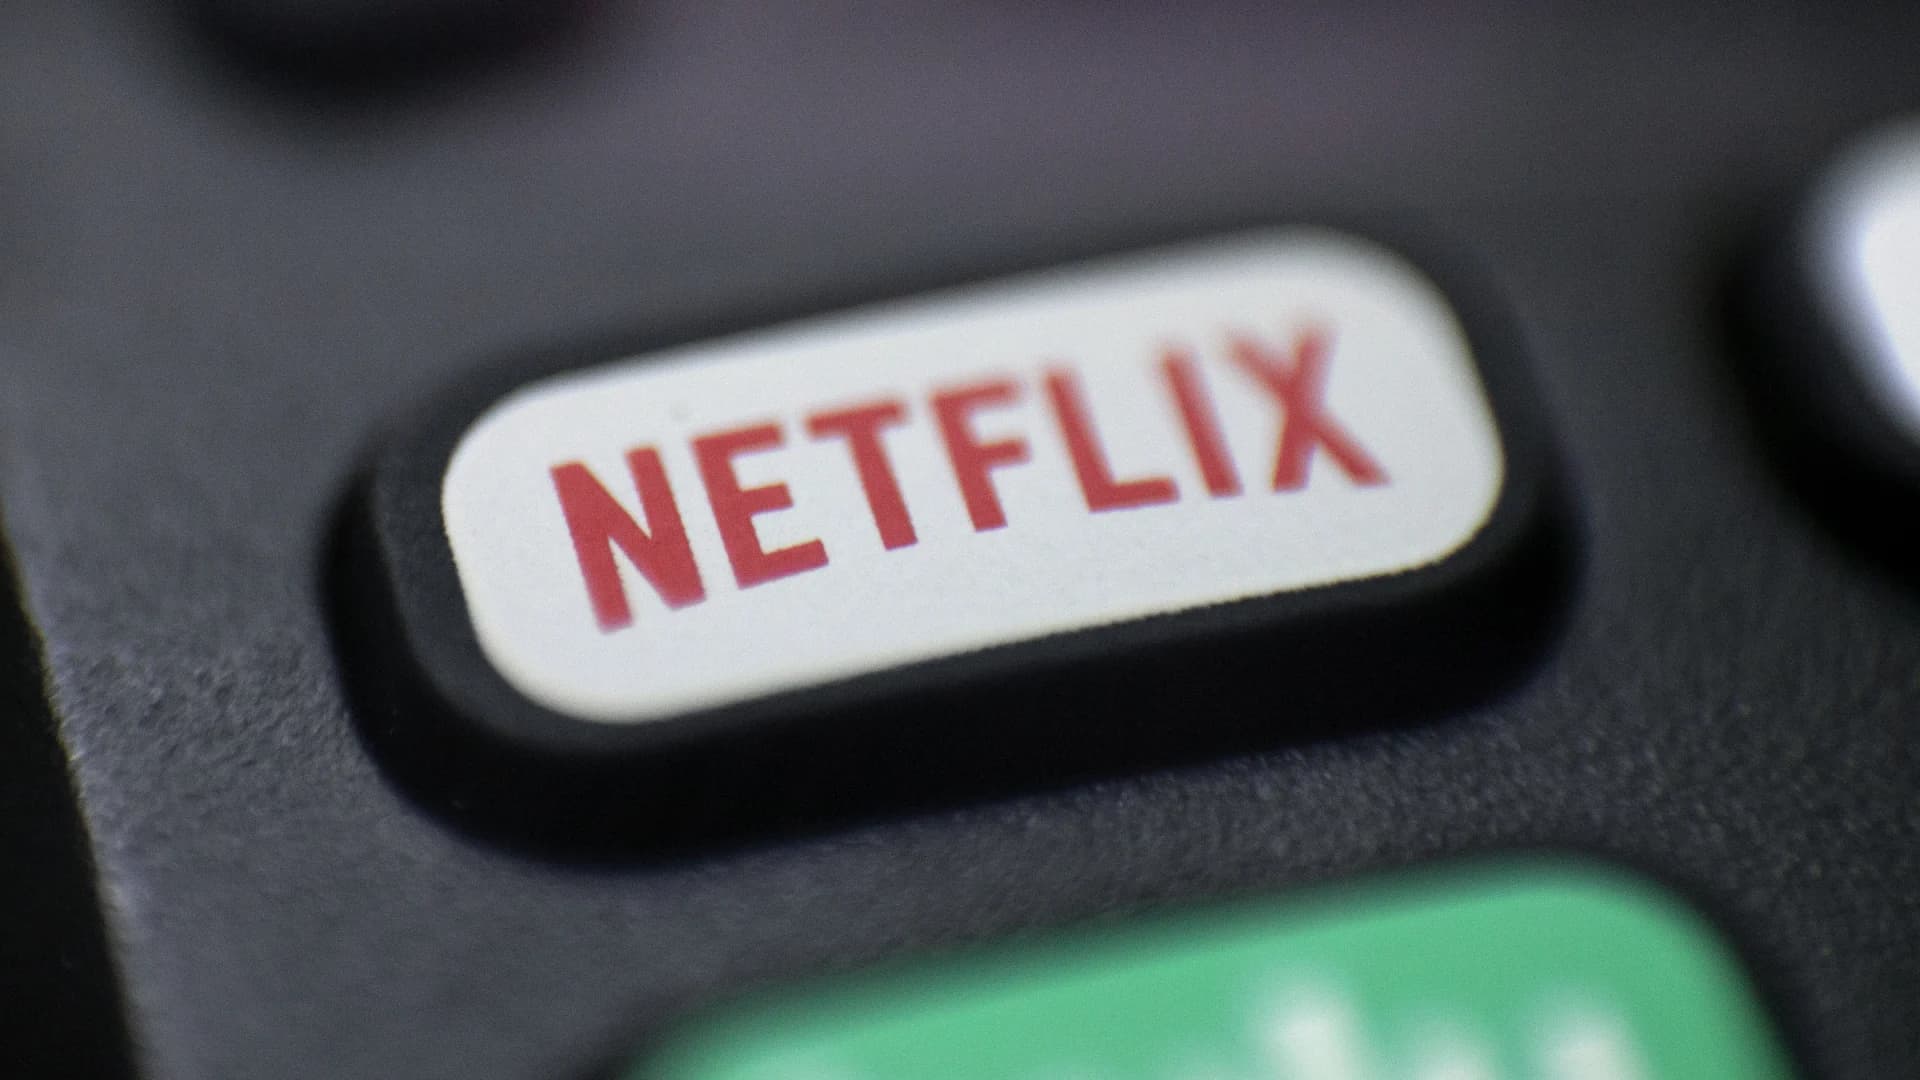 Netflix aims to curtail password sharing, considers ads as it loses 200K subscribers